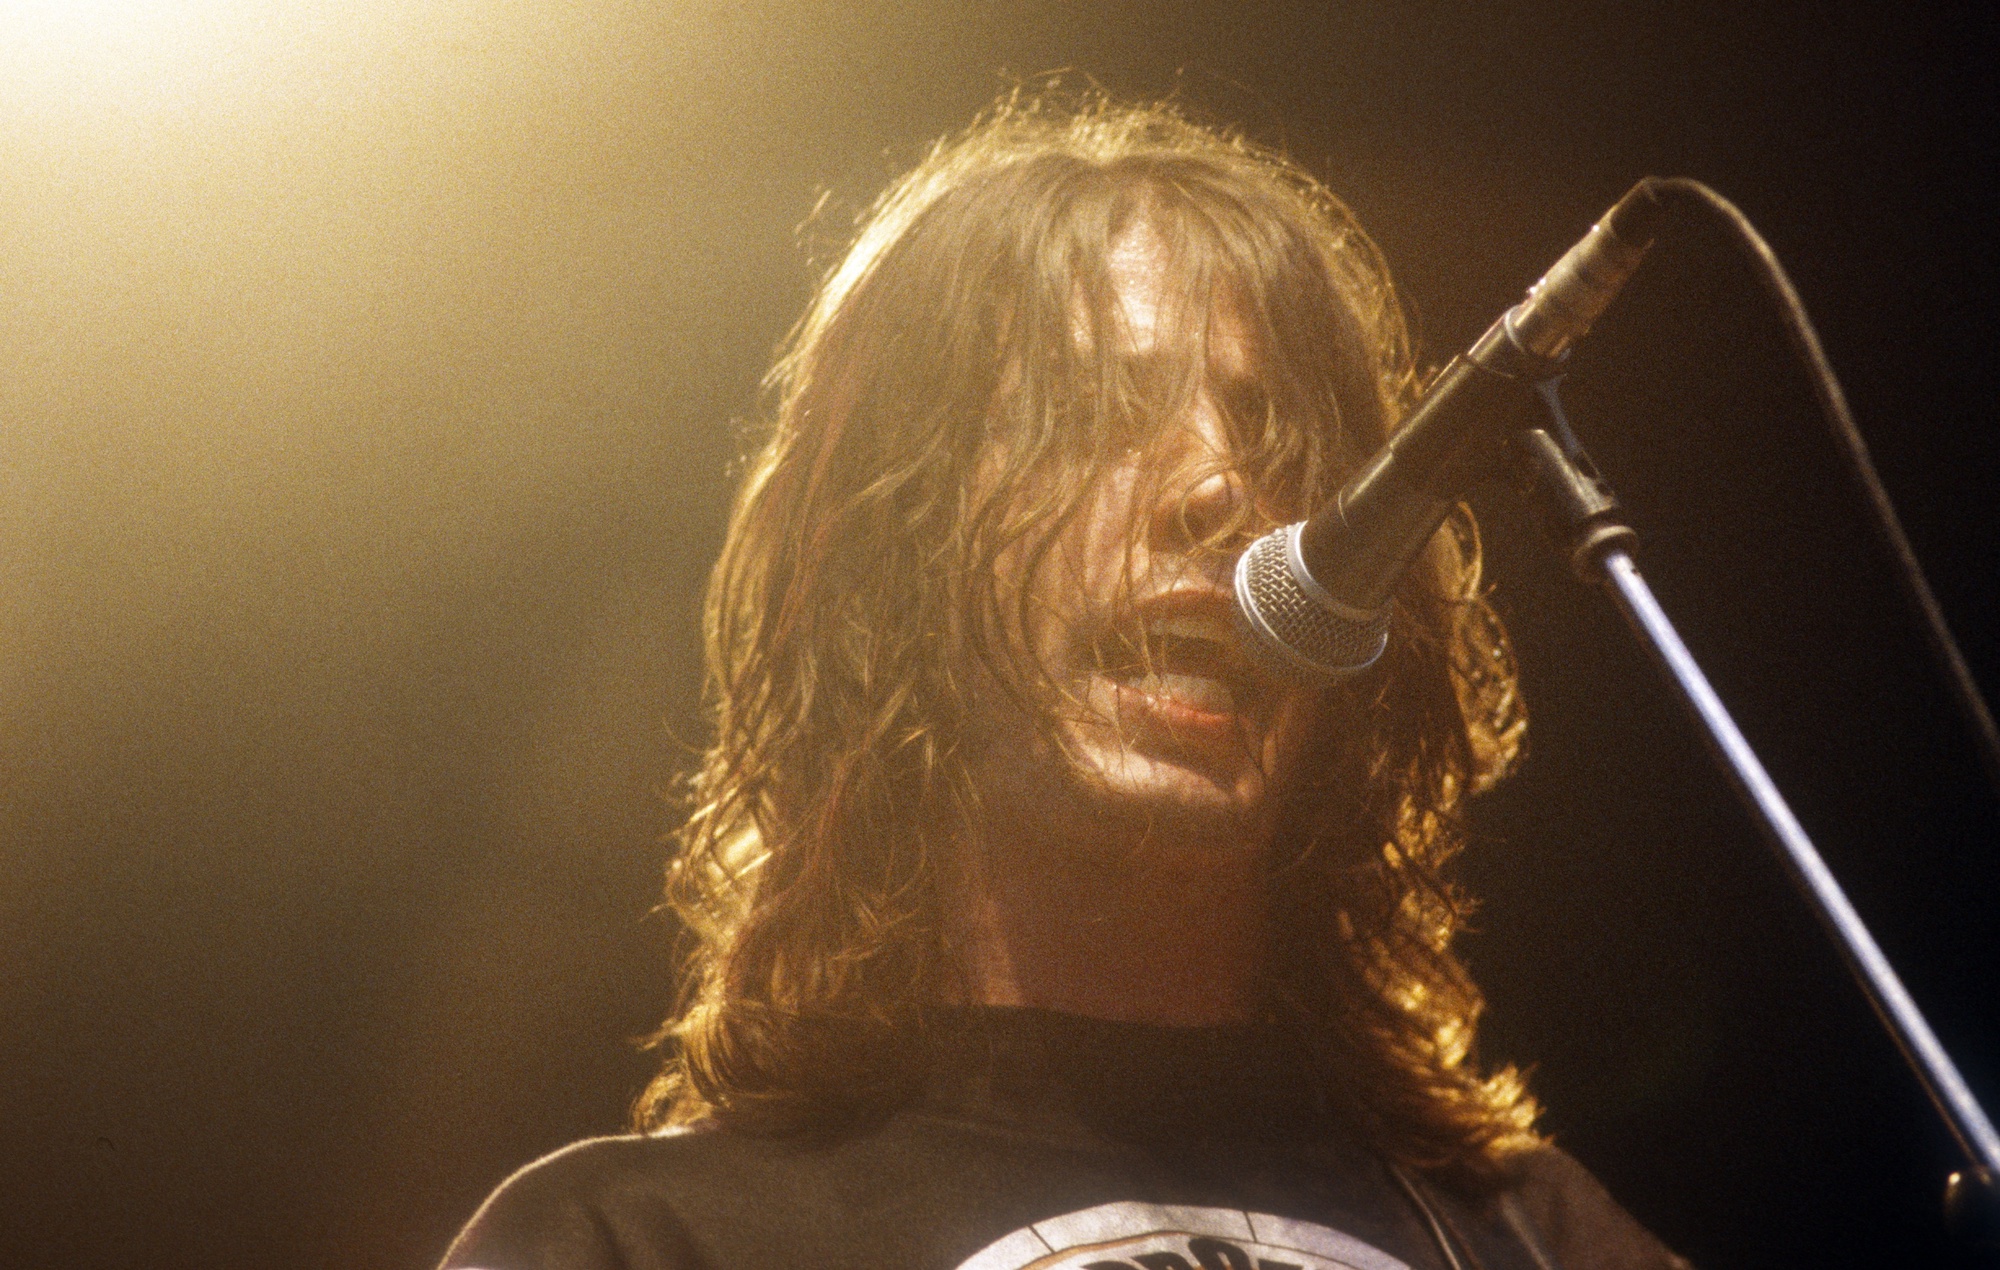 Dave Grohl reflects on making Foo Fighters' debut album 25 years on